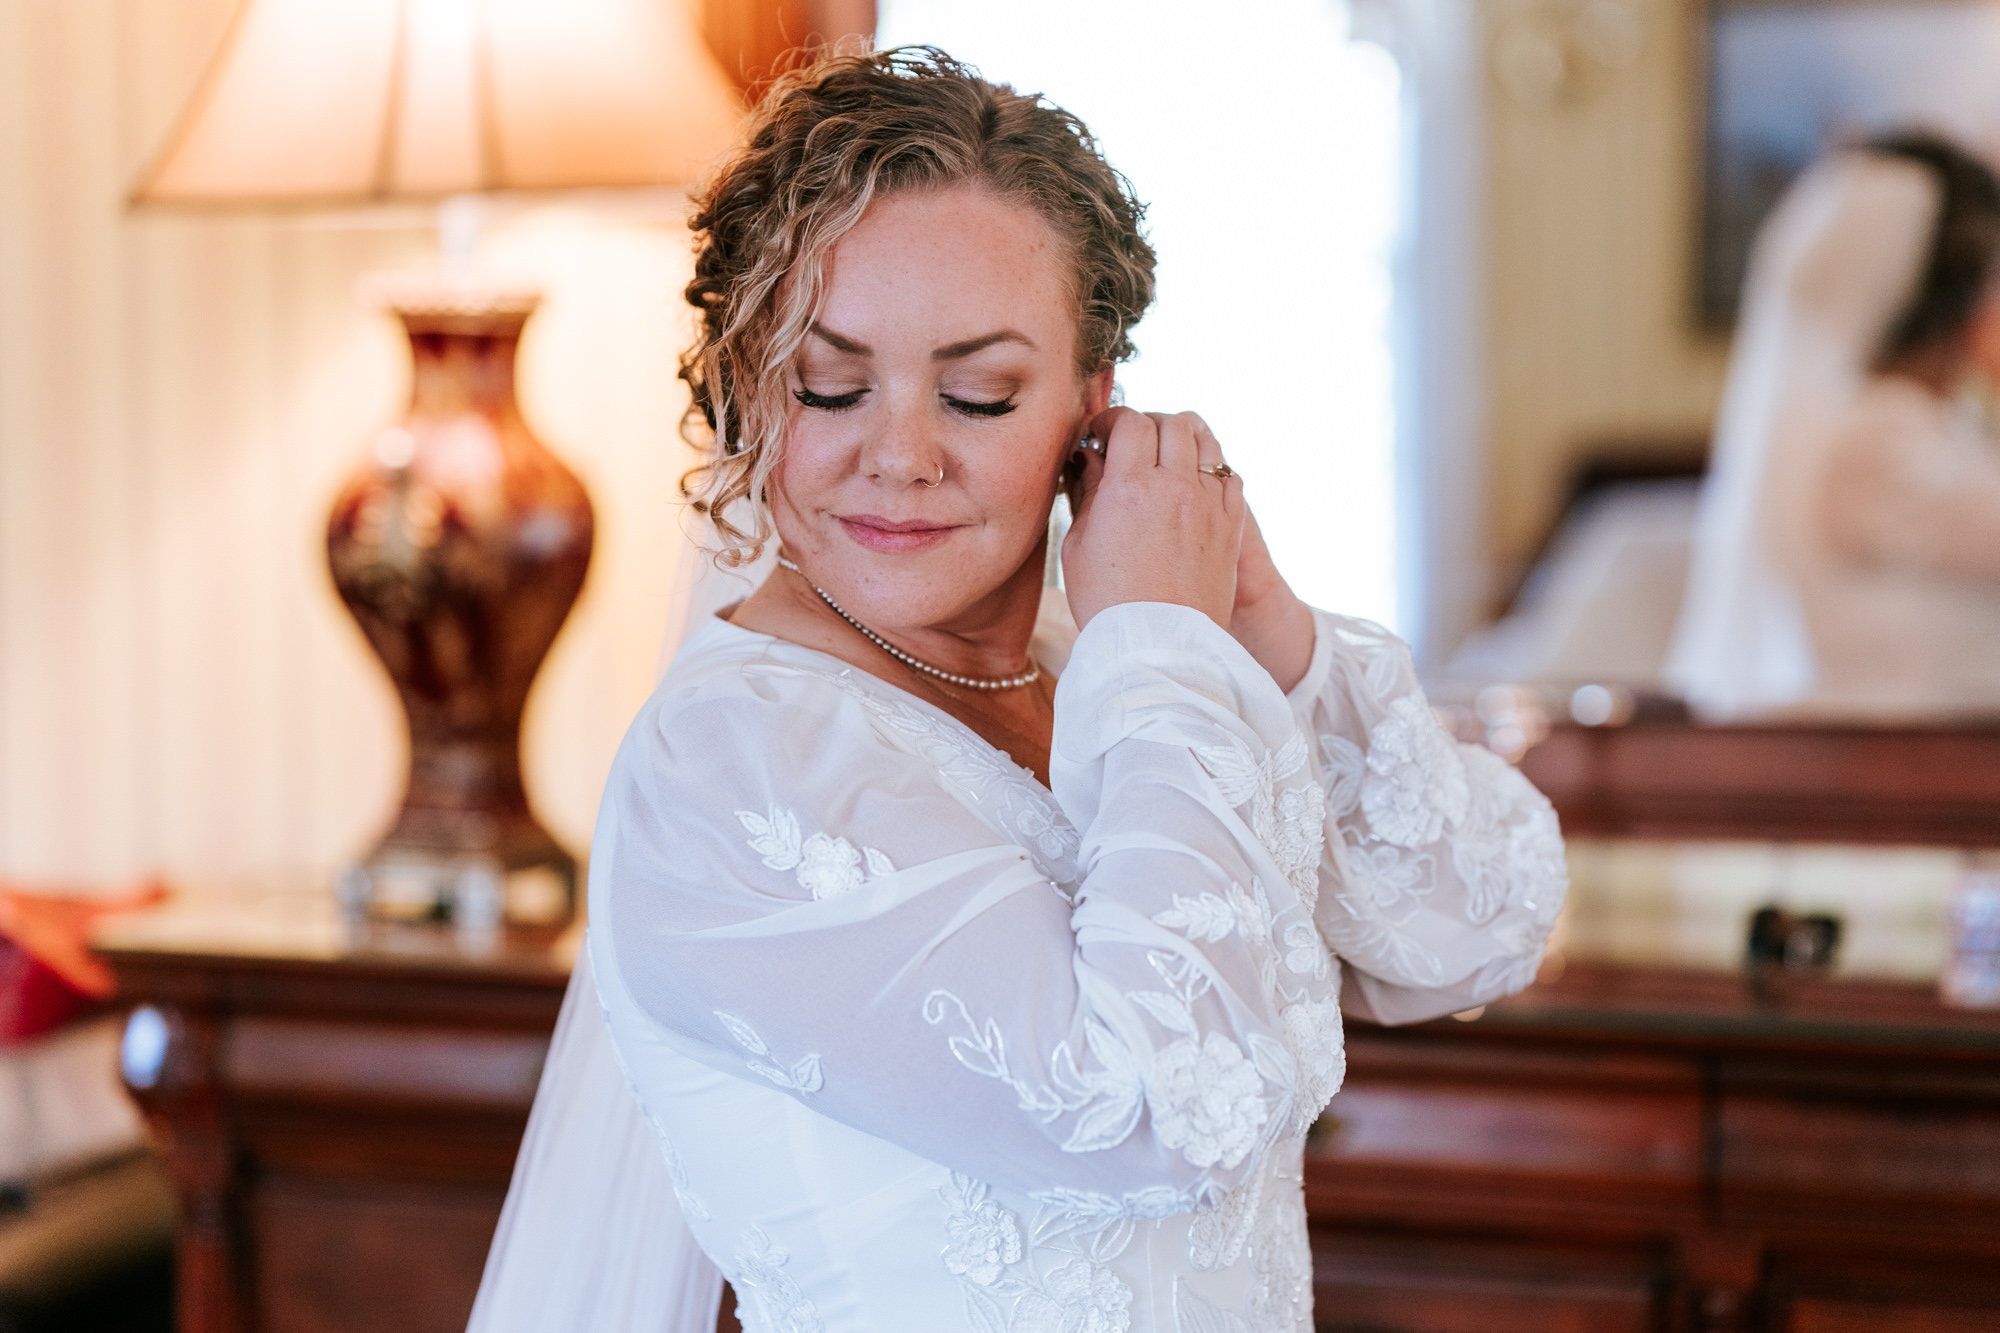 bride adjusting her earring while getting ready for her wedding day